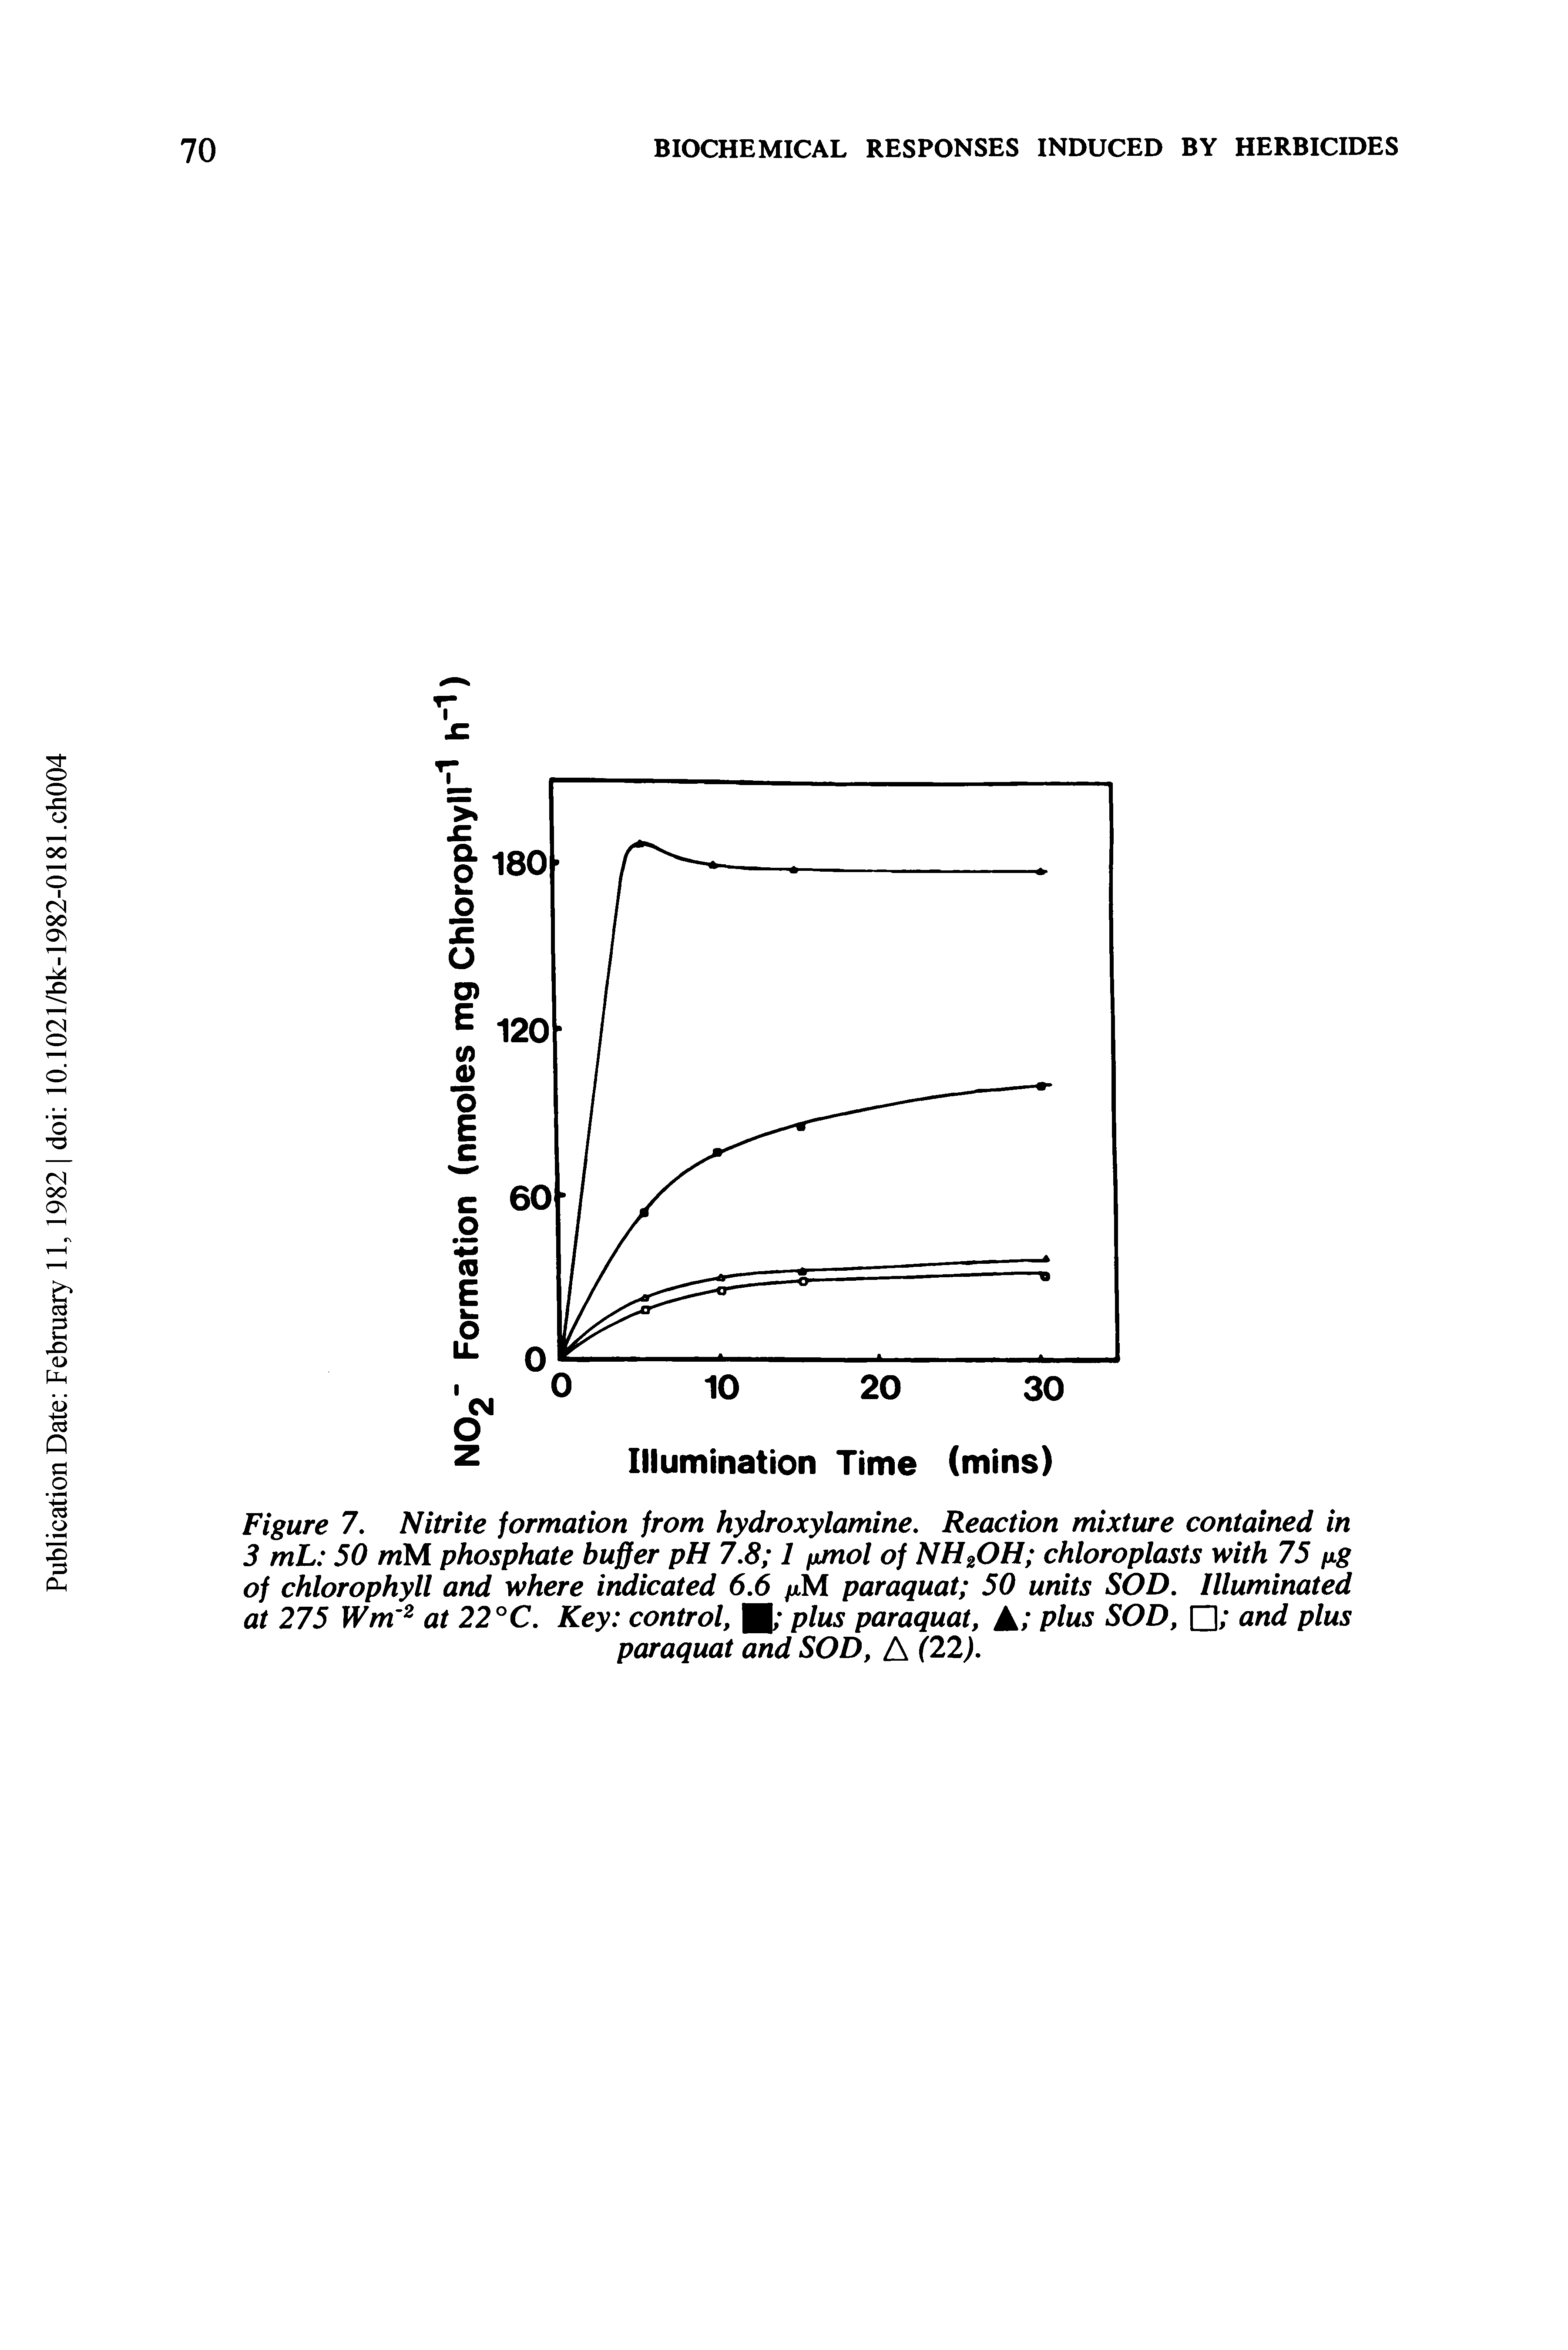 Figure 7. Nitrite formation from hydroxylamine. Reaction mixture contained in 3 mL 50 mM phosphate buffer pH 7.8 1 fjjnol of NH OH chloroplasts with 75 /xg of chlorophyll and where indicated 6.6 /aM paraquat 50 units SOD. Illuminated at 275 Wm at 22°C. Key control, plus paraquat. A plus SOD, and plus paraquat and SOD, A (72).